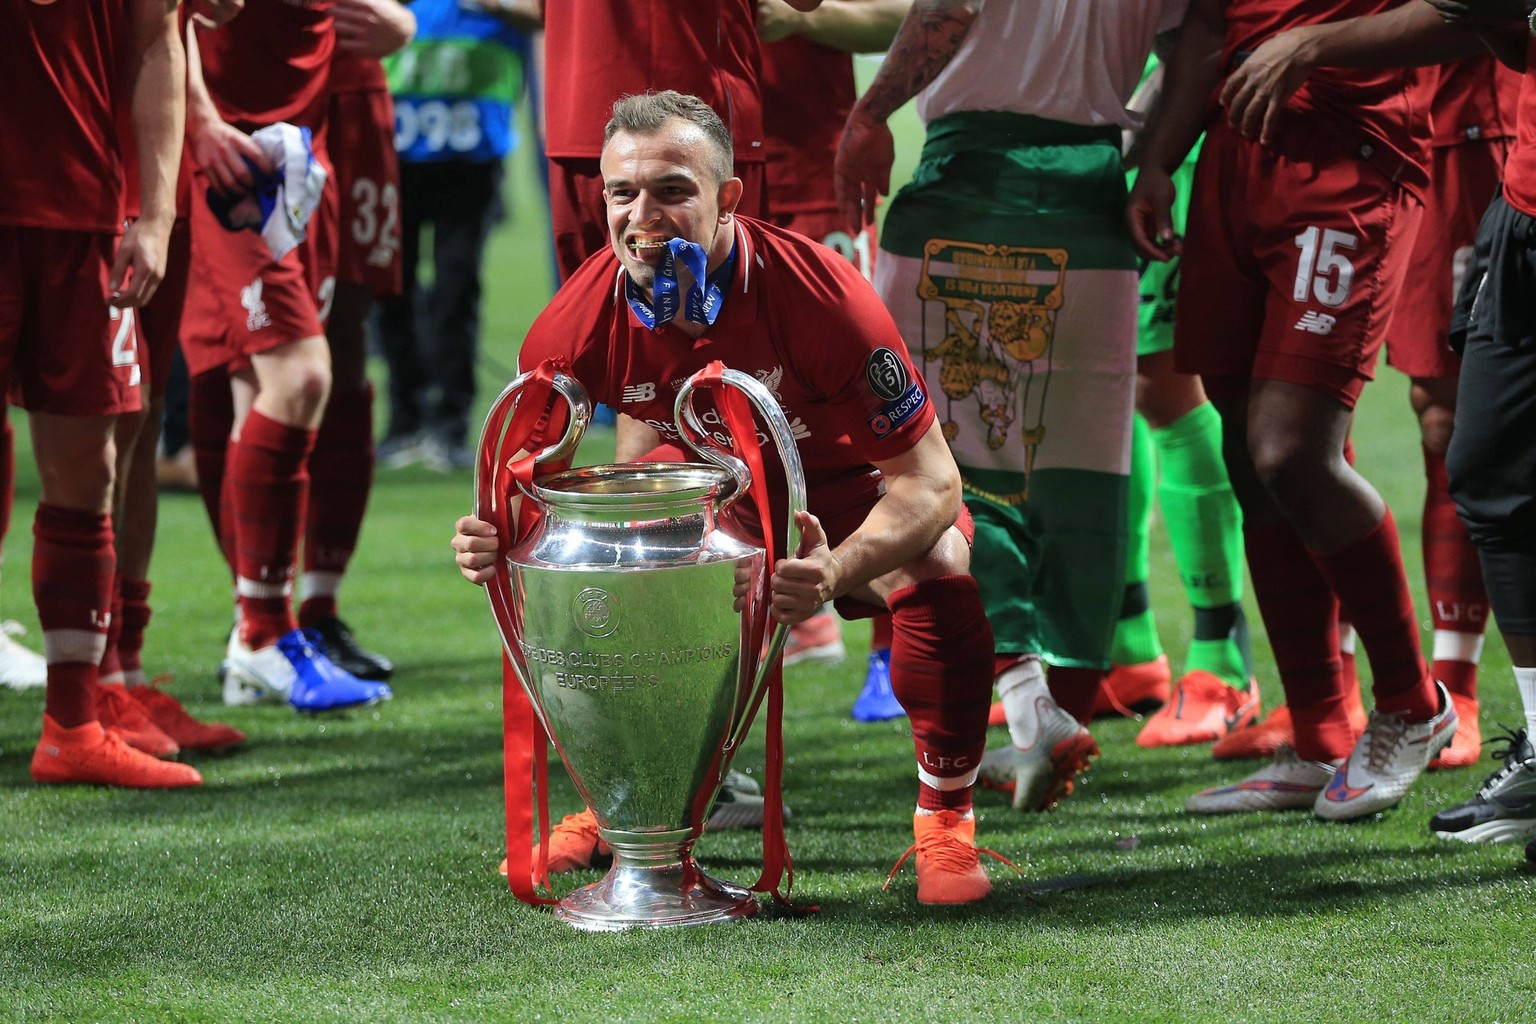 Mandatory Credit: Photo by BPI/Shutterstock 10265937wh Xherdan Shaqiri of Liverpool celebrates with the Champions League Trophy at the end Tottenham Hotspur v Liverpool, UEFA Champions League Final, F ...